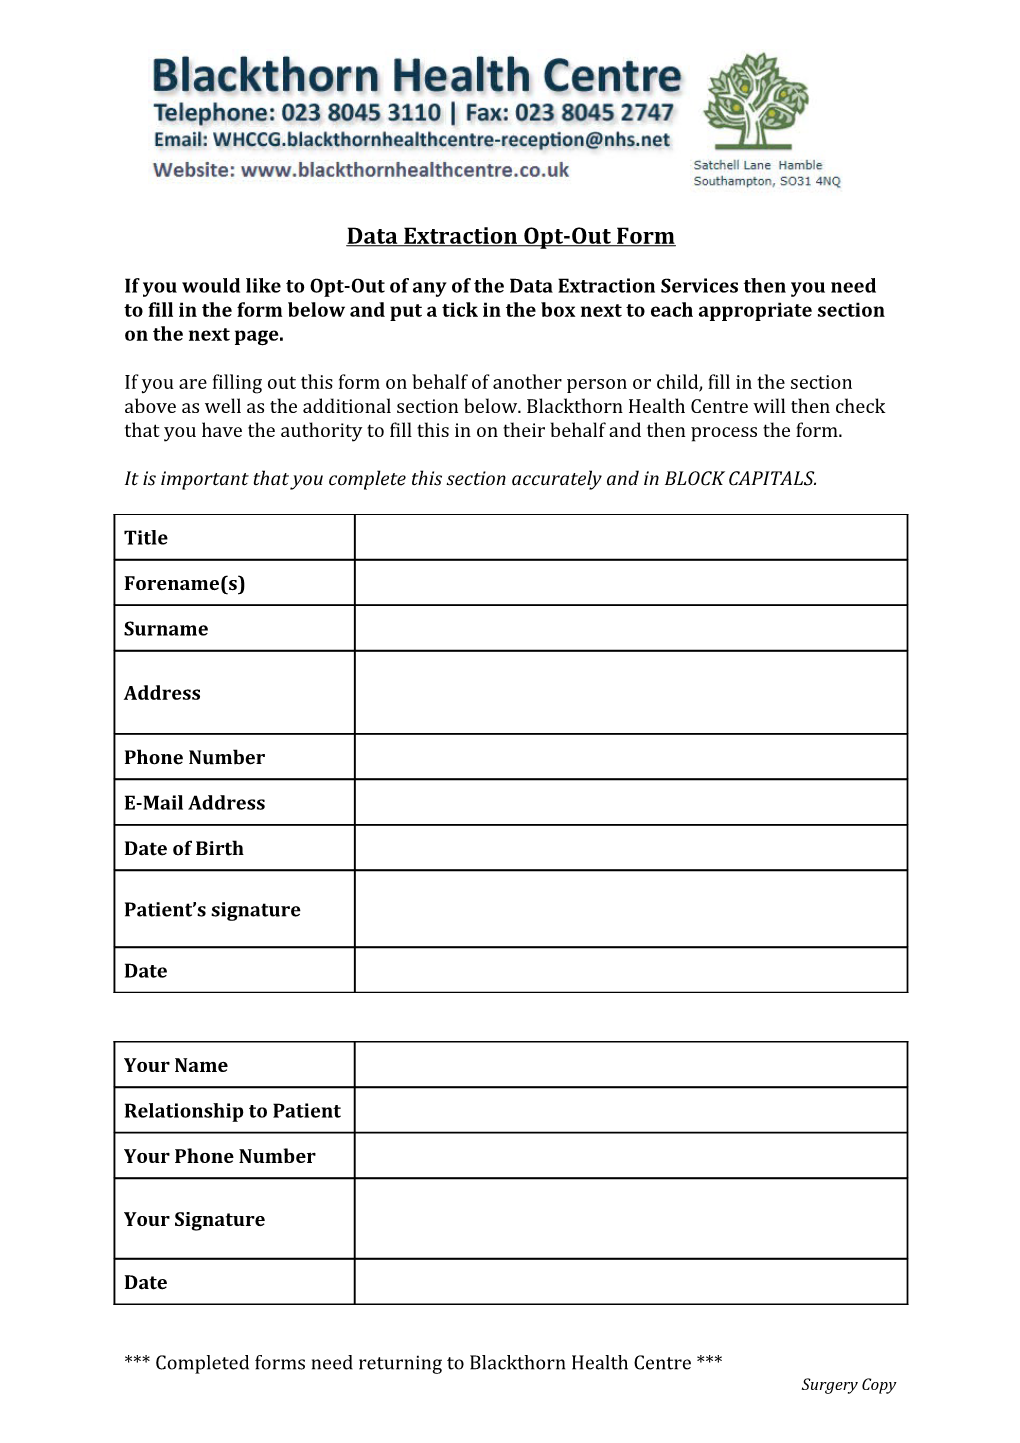 Data Extraction Opt-Out Form